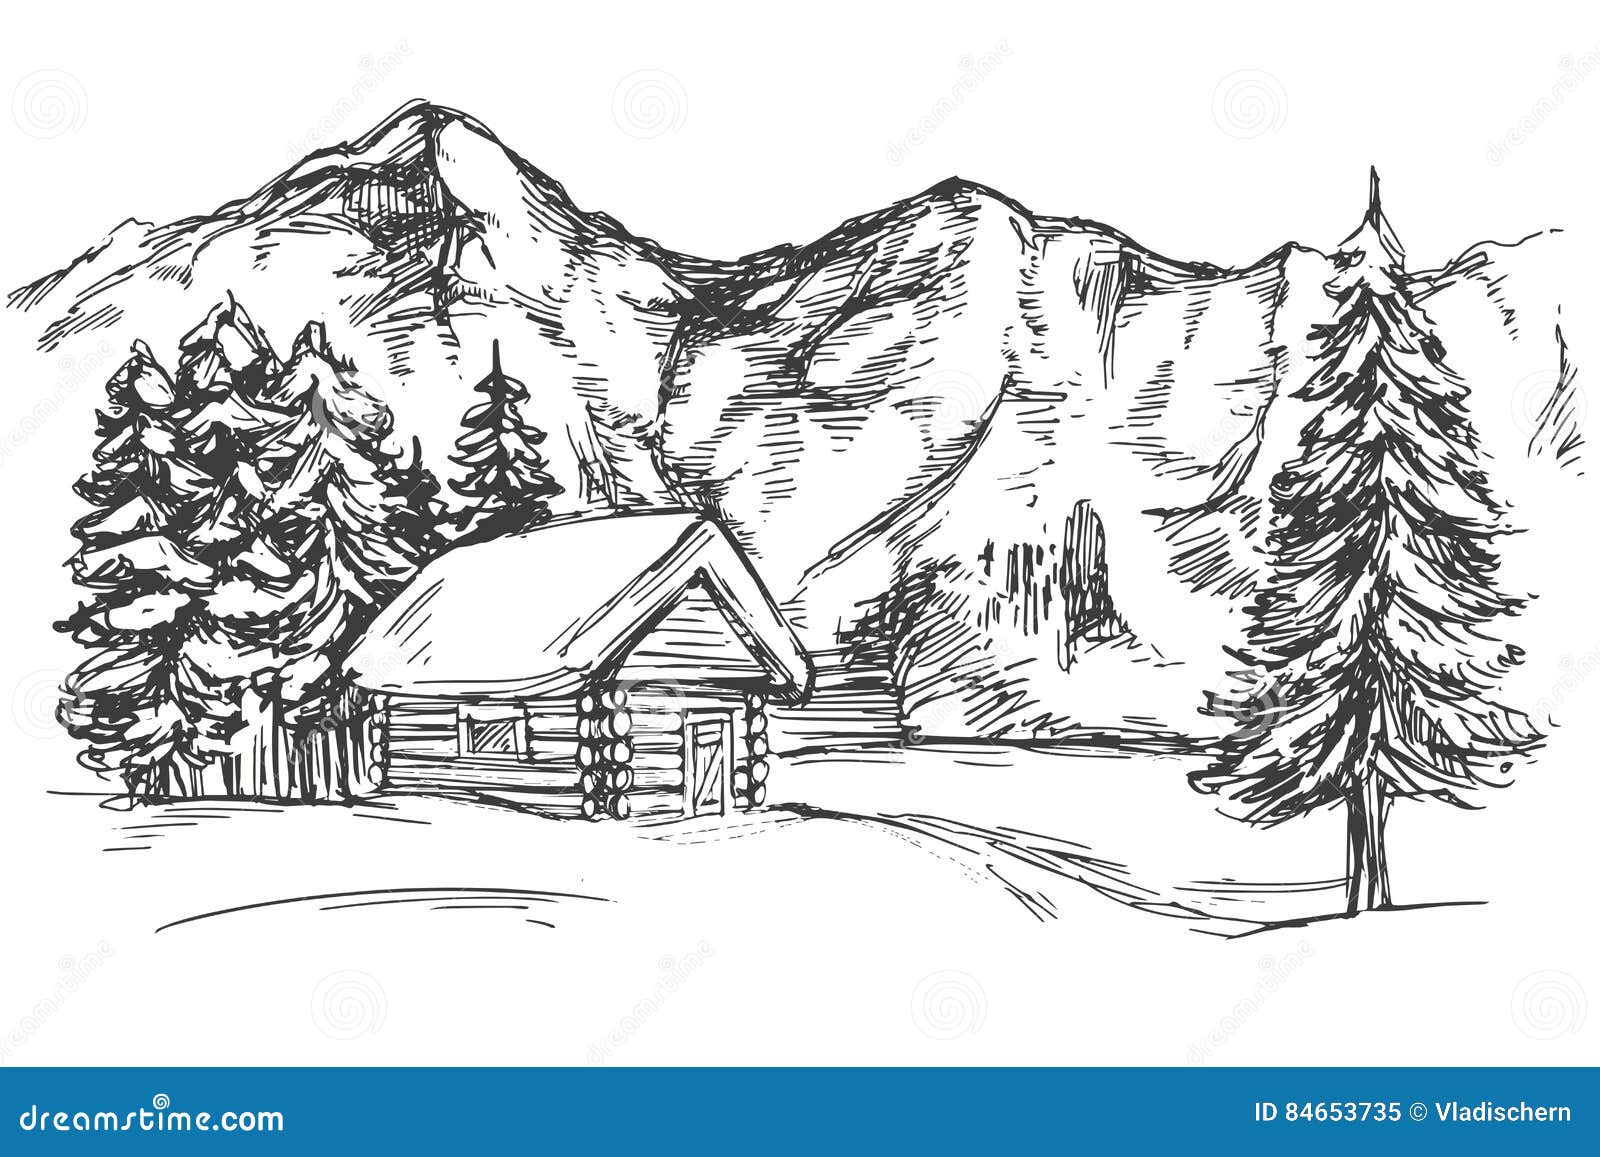 House in Mountain the Snow Landscape Hand Drawn Vector Illustration ...